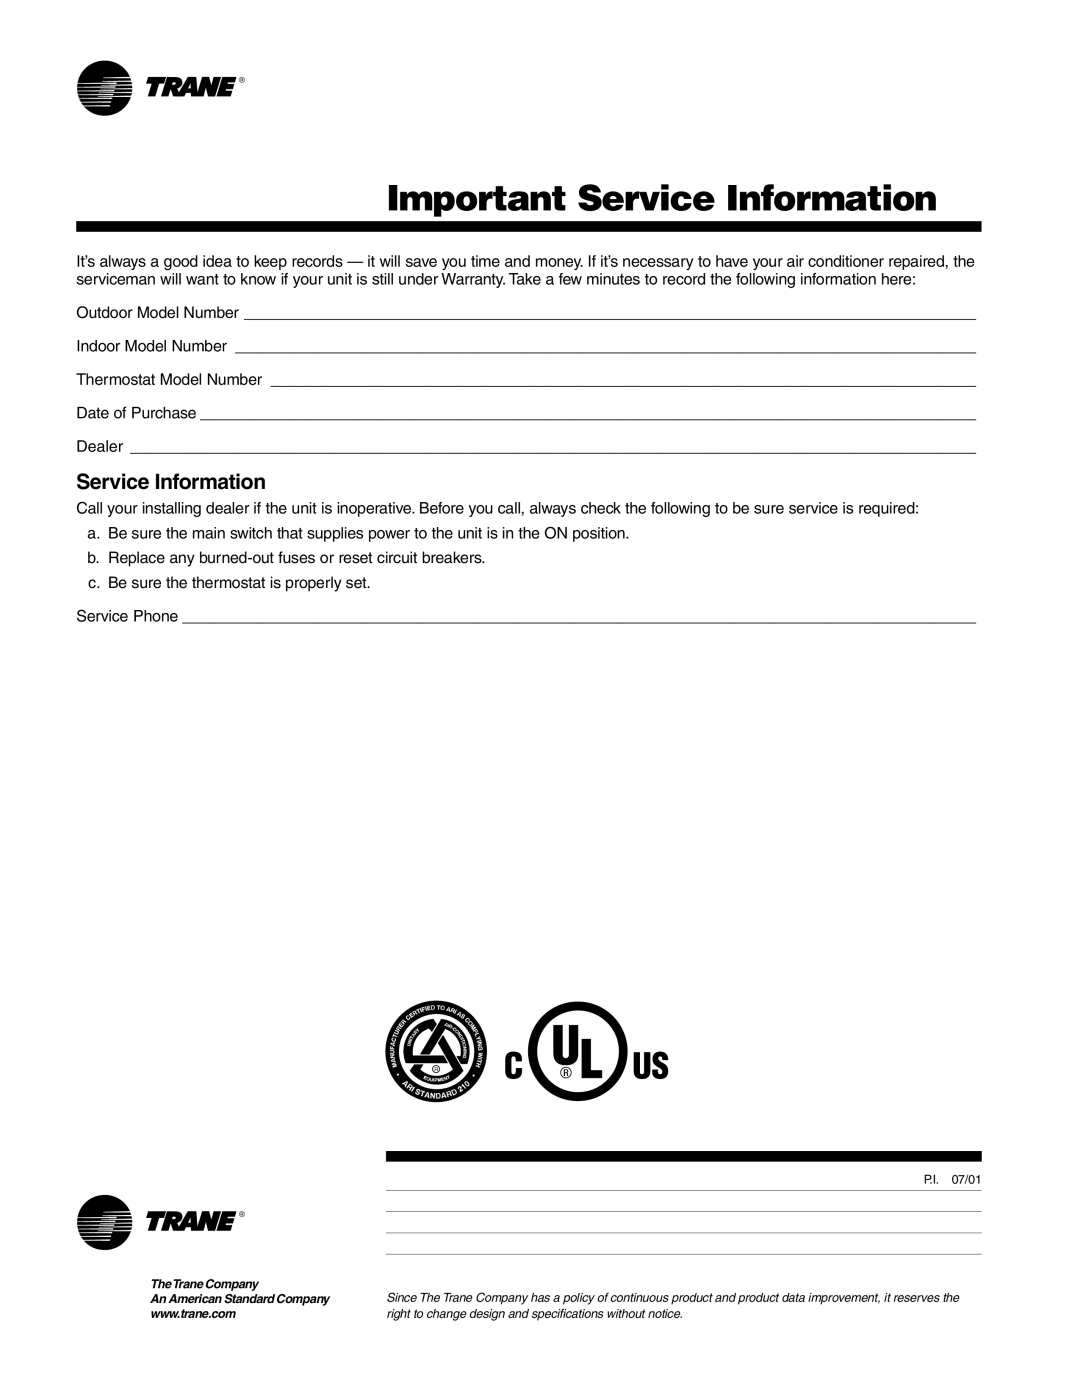 Trane Central Air Conditioning manual Important Service Information 